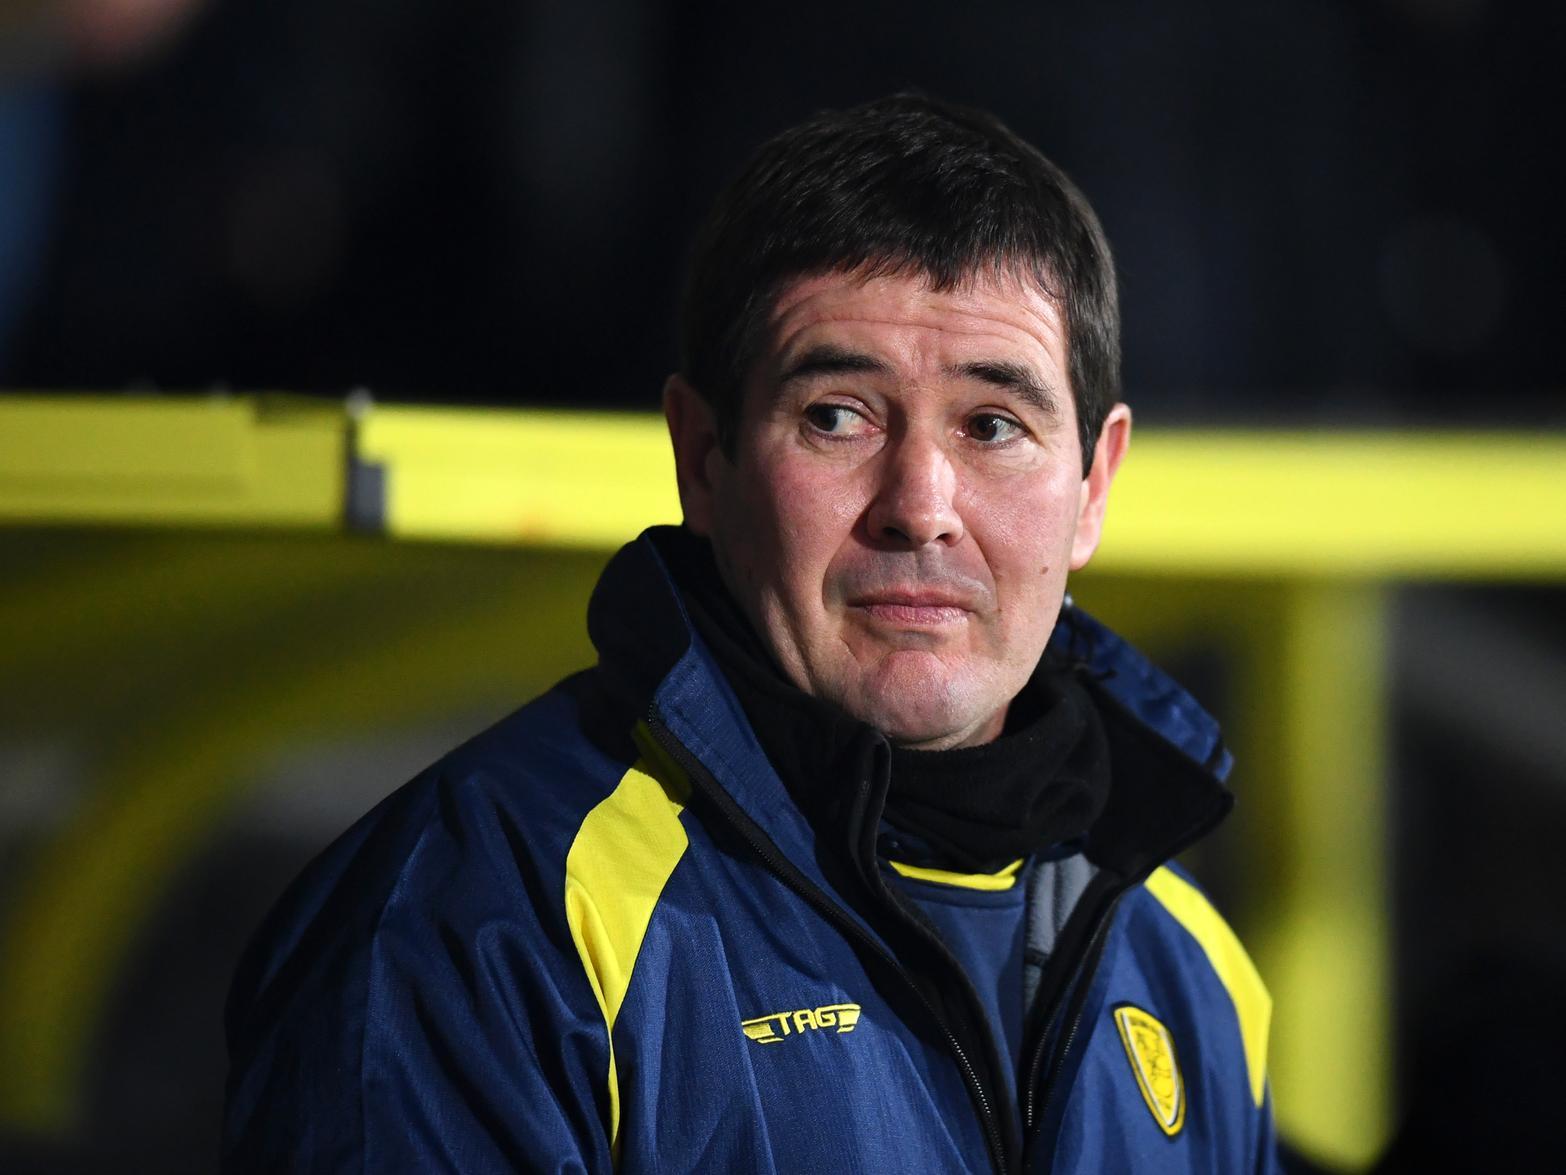 Nigel Clough's side, who play the Posh this weekend are currently down in 15th place in the table, and can't seem to string a solid set of results together at the moment.